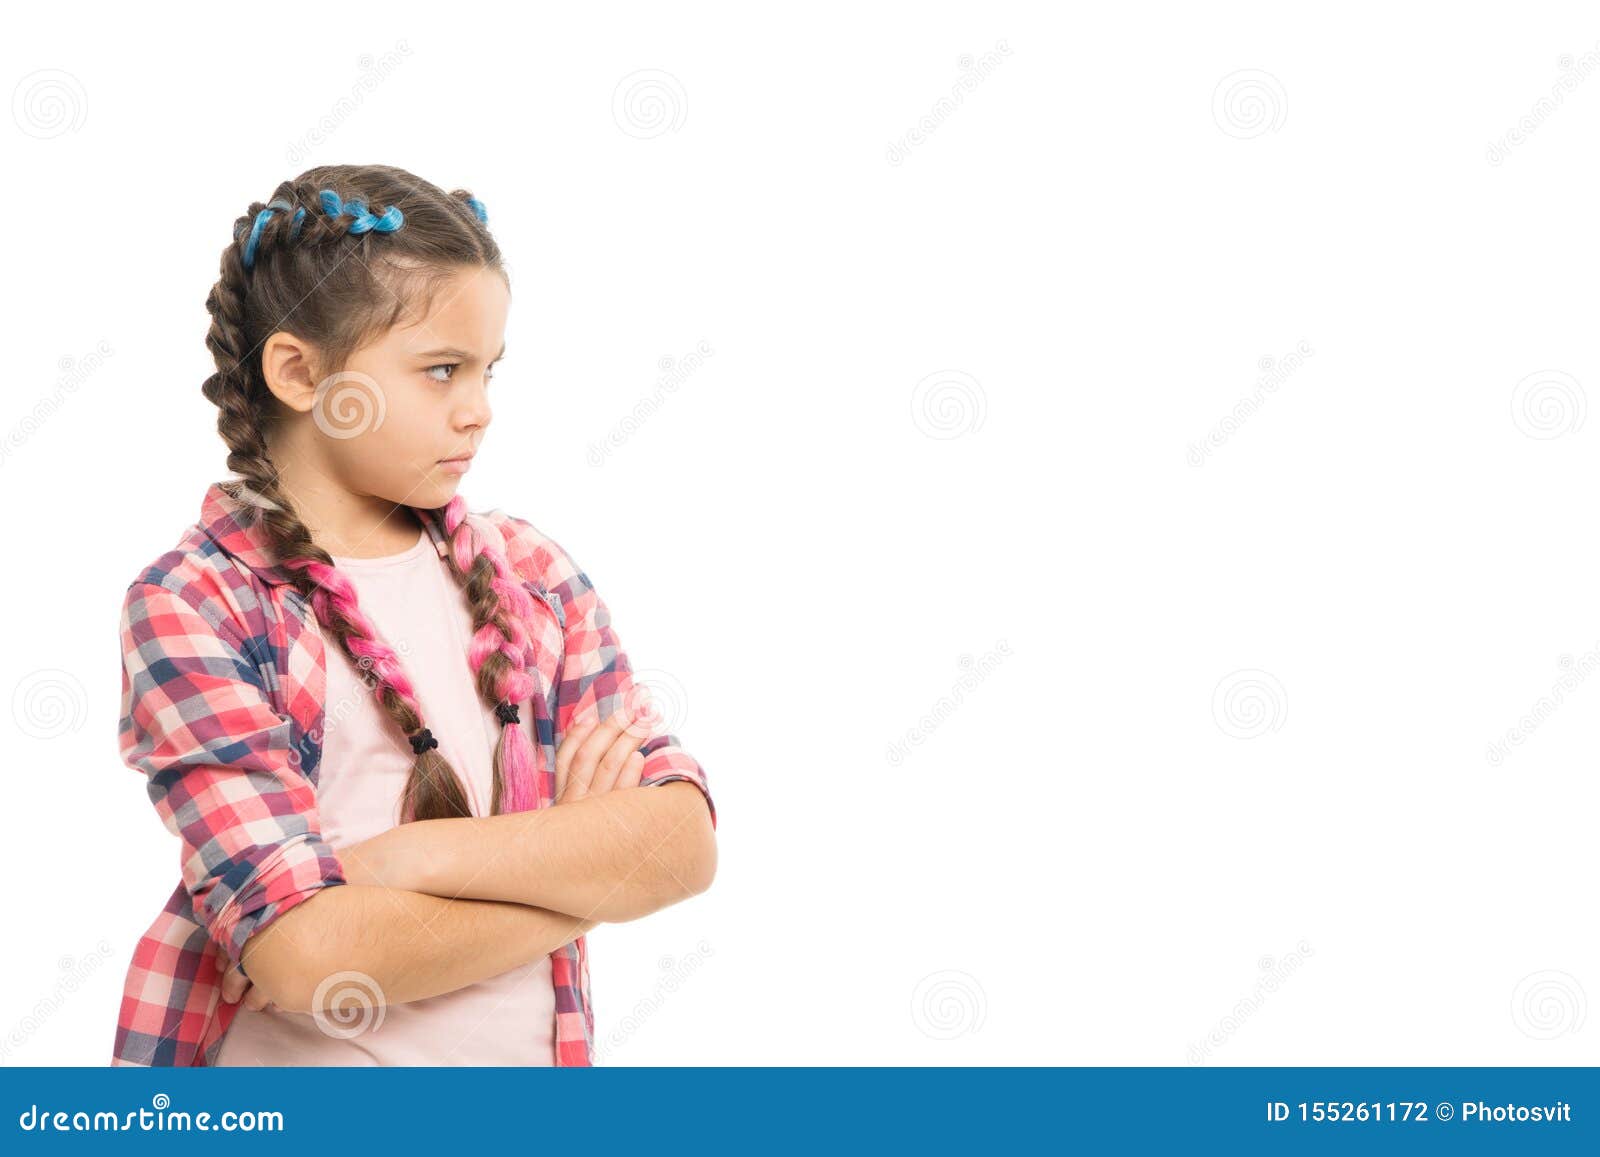 stubborn child. disagreement and stubbornness. girl serious face offended. kid looks strictly. girl folded arms on chest